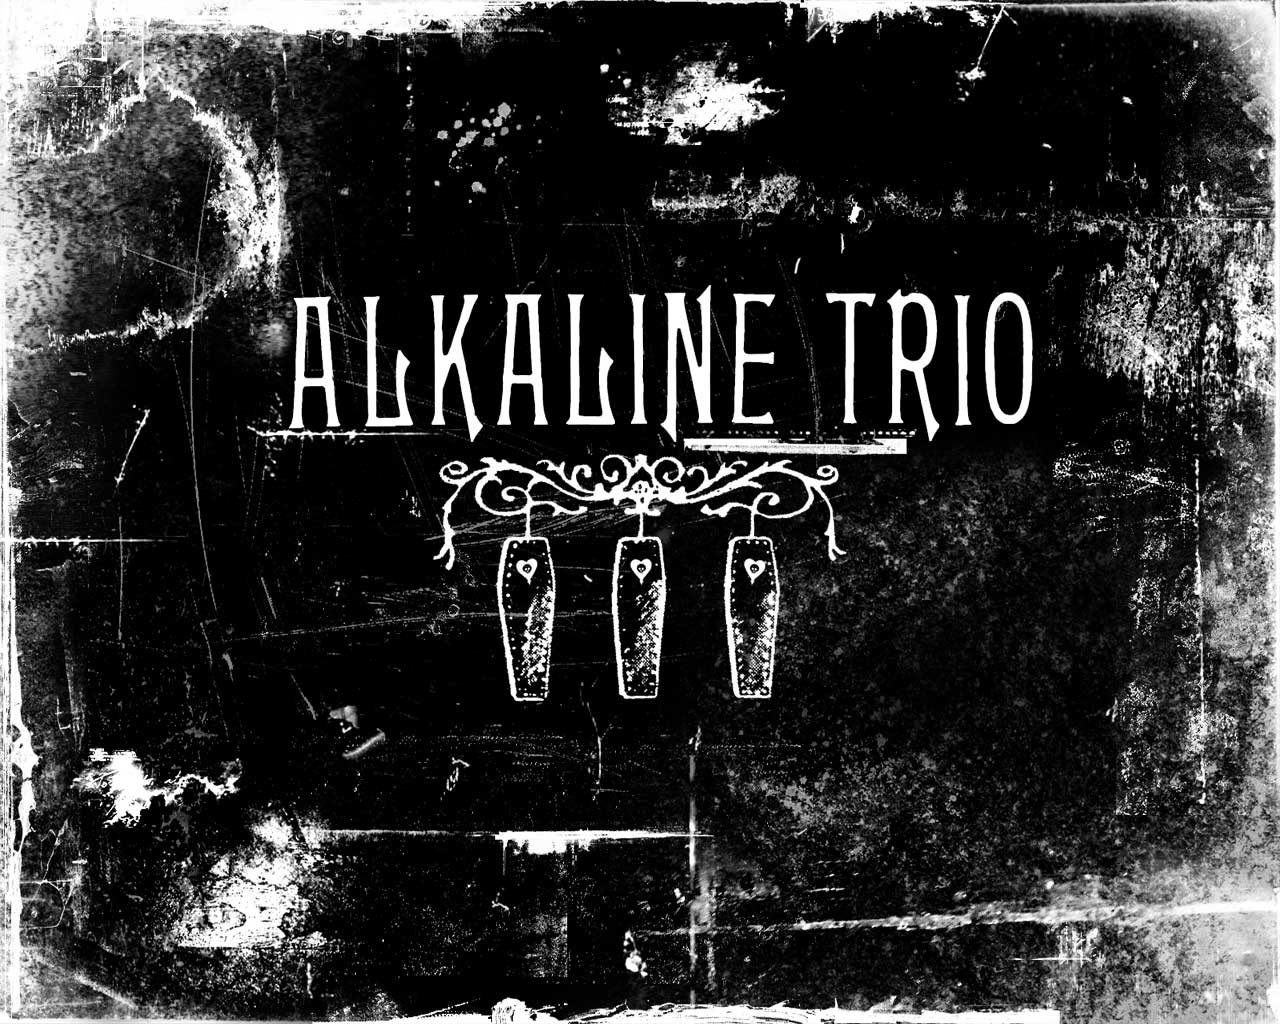 Free download Alkaline Trio Wallpapers [1280x1024] for your 1280x1024